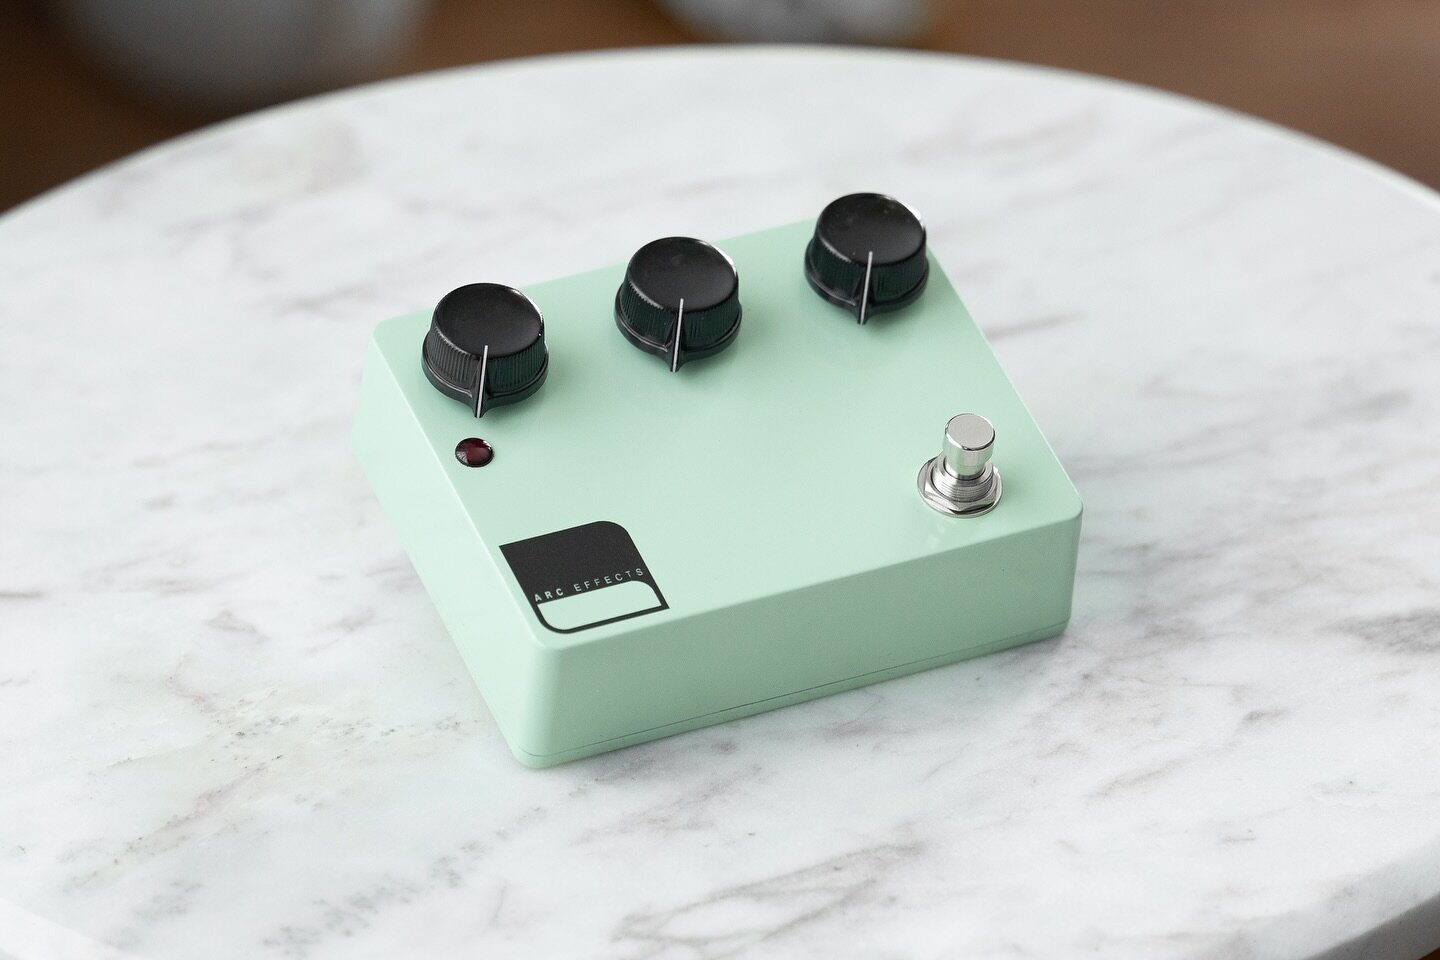 🌊 #SurfsUp #JustKiddingItsSnowing 

Seafoam Green KV2 w/ top jacks + black Dakaware knobs + red fresnel lens LED⚡️In stock now at http://arc-effects.com/in-stock